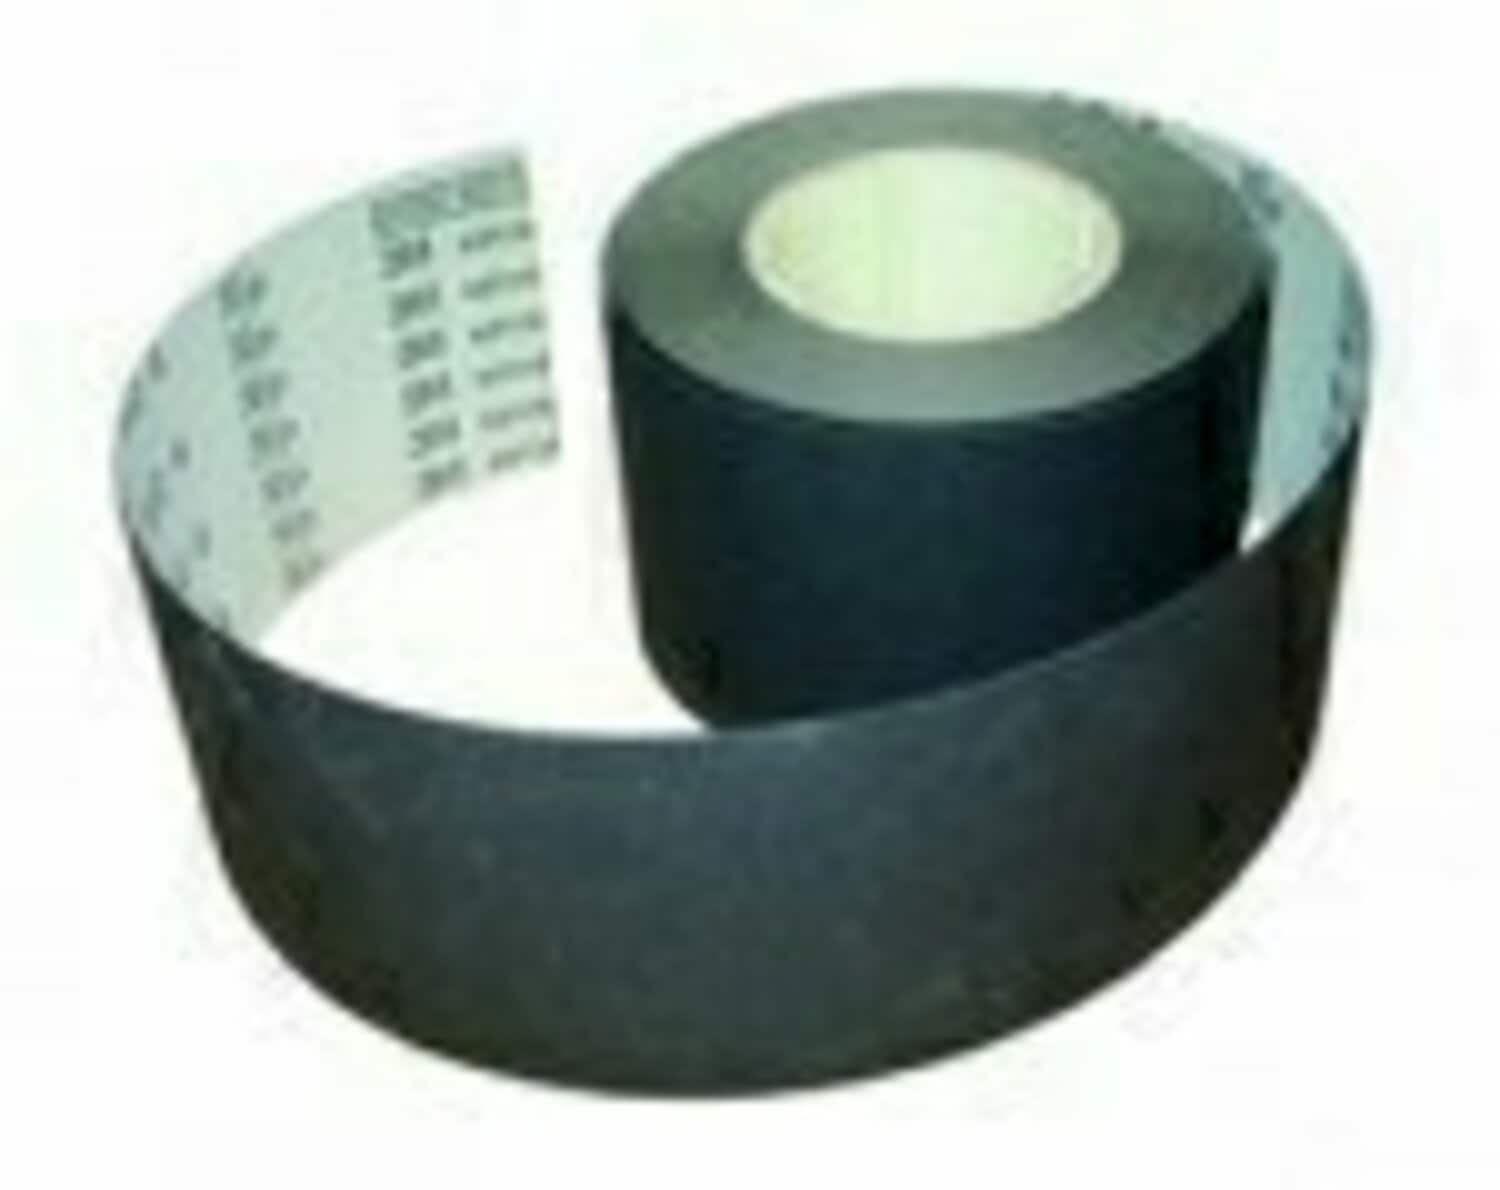 7010509960 - 3M Microfinishing Film Roll 472L, 40 Mic 5MIL, Type E, 8 in x 150 ft x
3 in (203.2mmx45.75m), Keyed Core, ASO